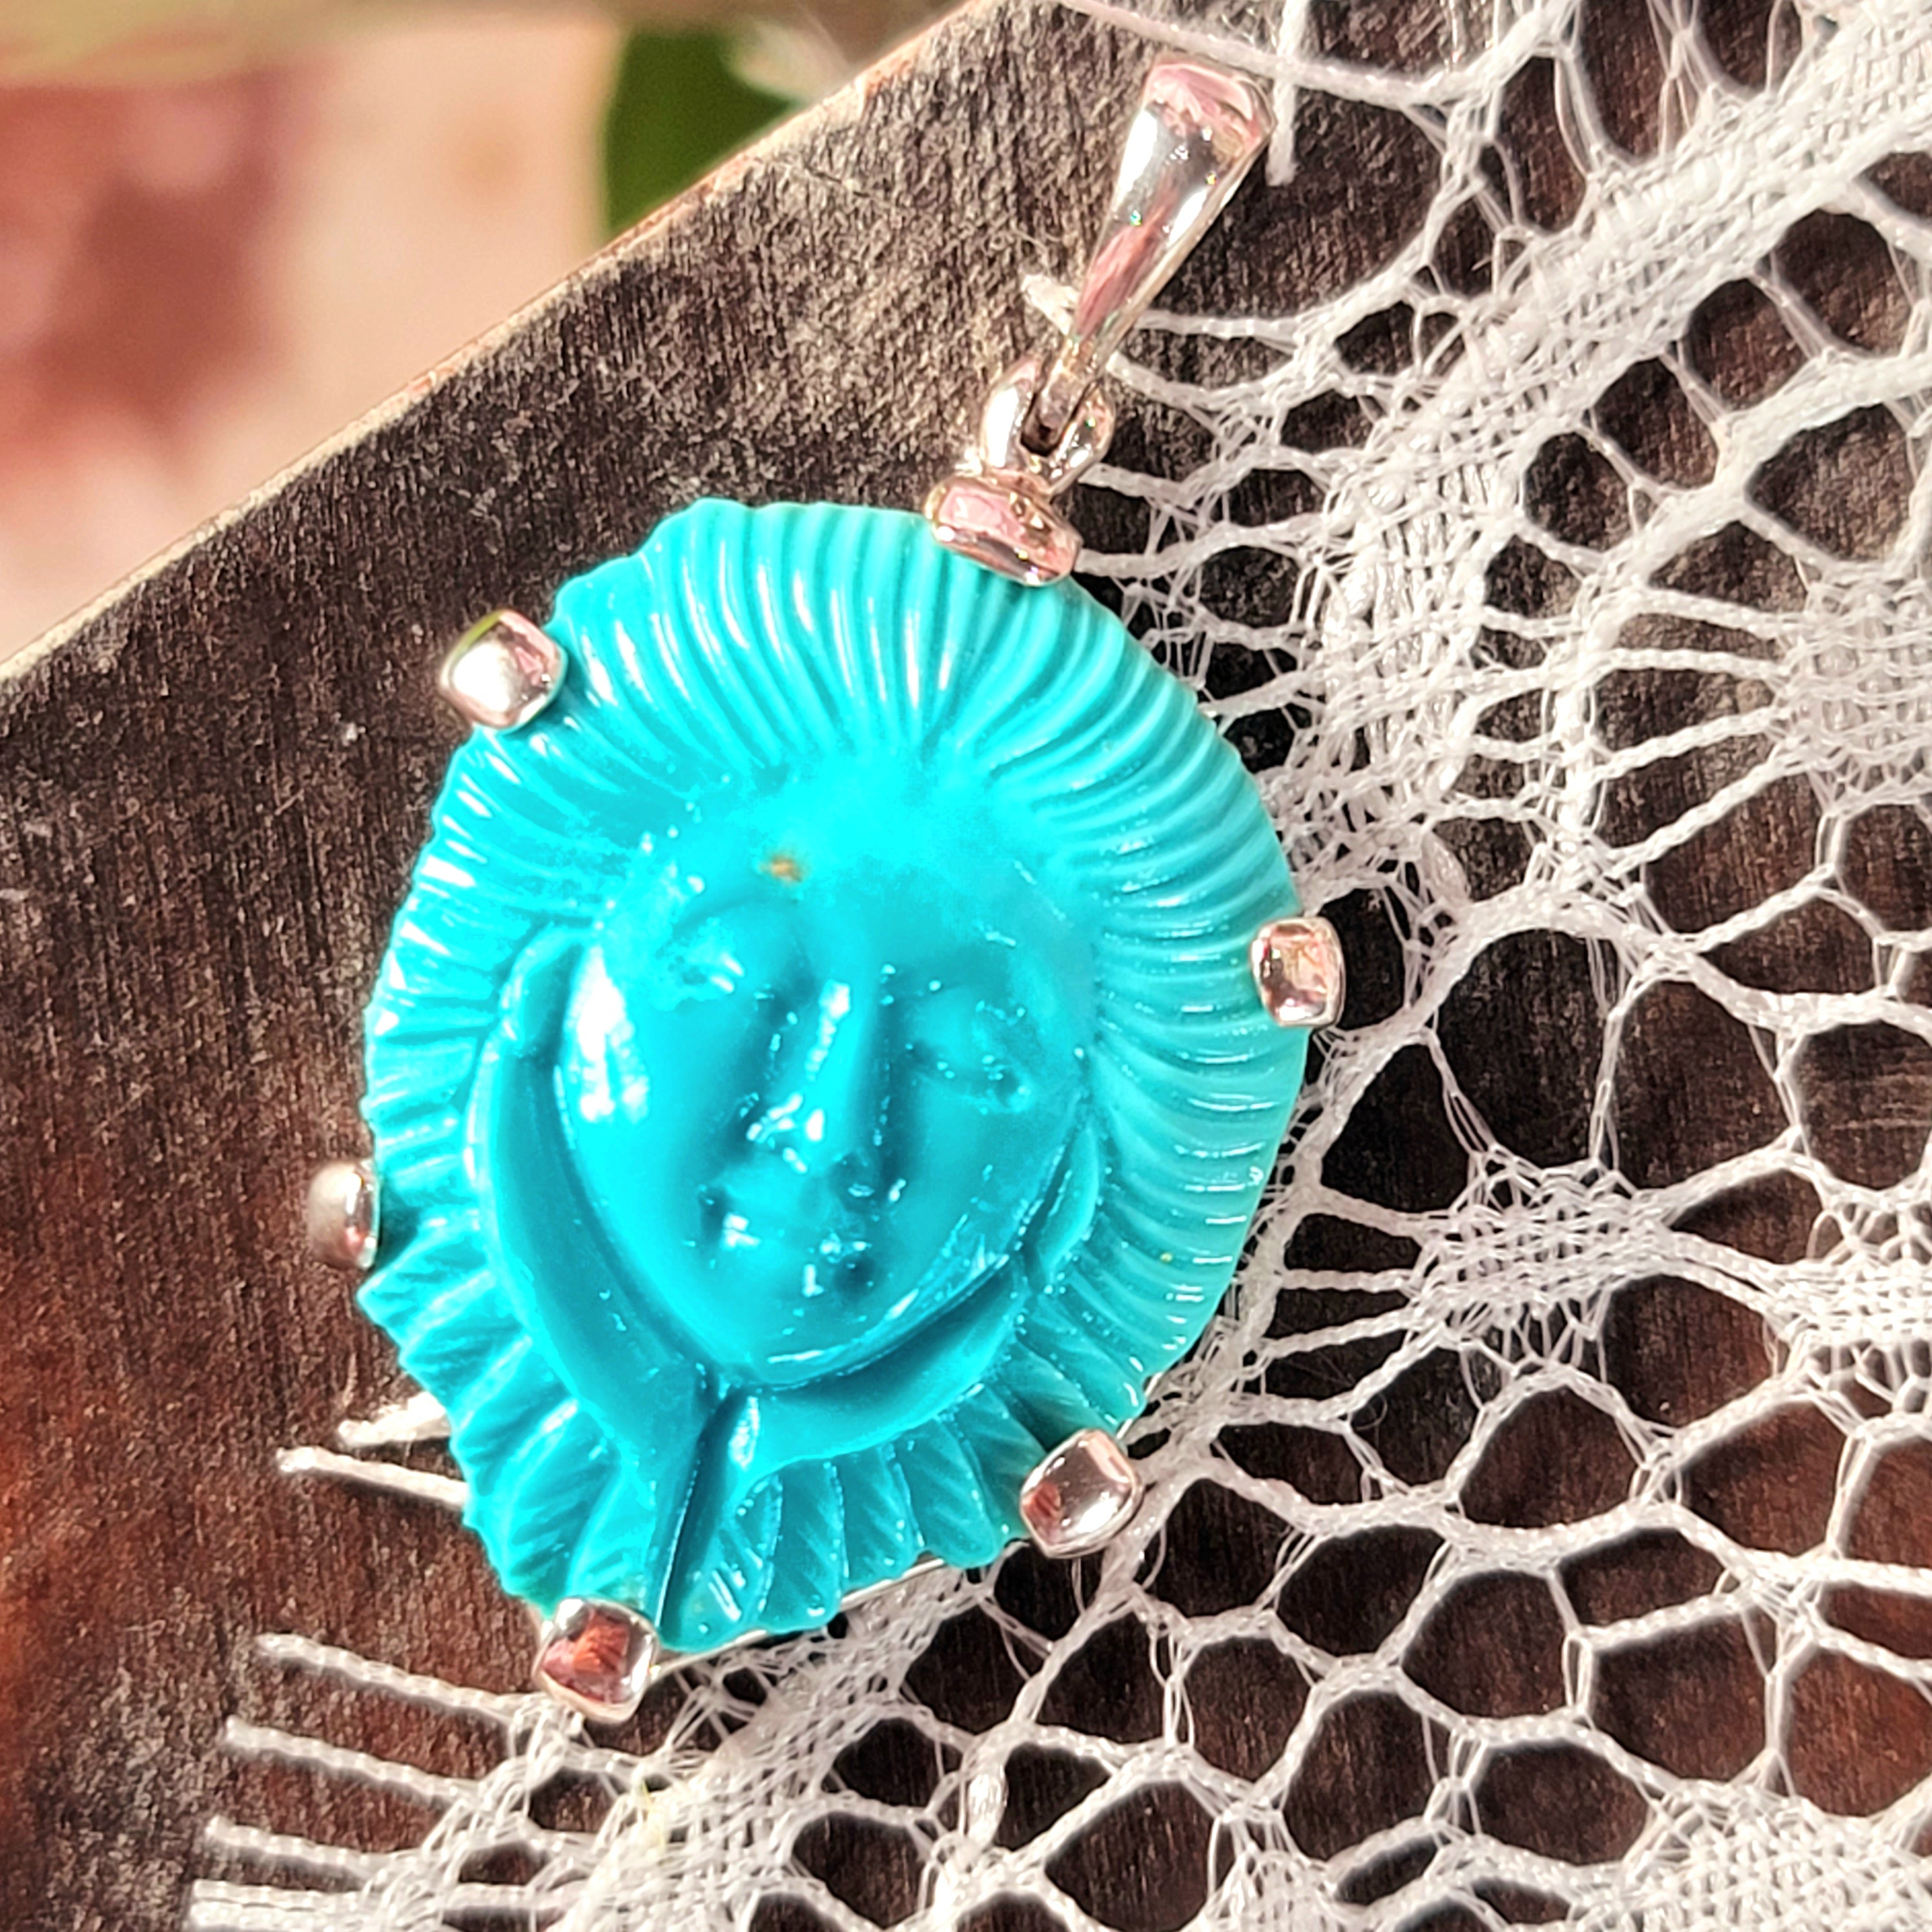 Turquoise Carved Pendant for Good Luck, Love, Prosperity and Protection